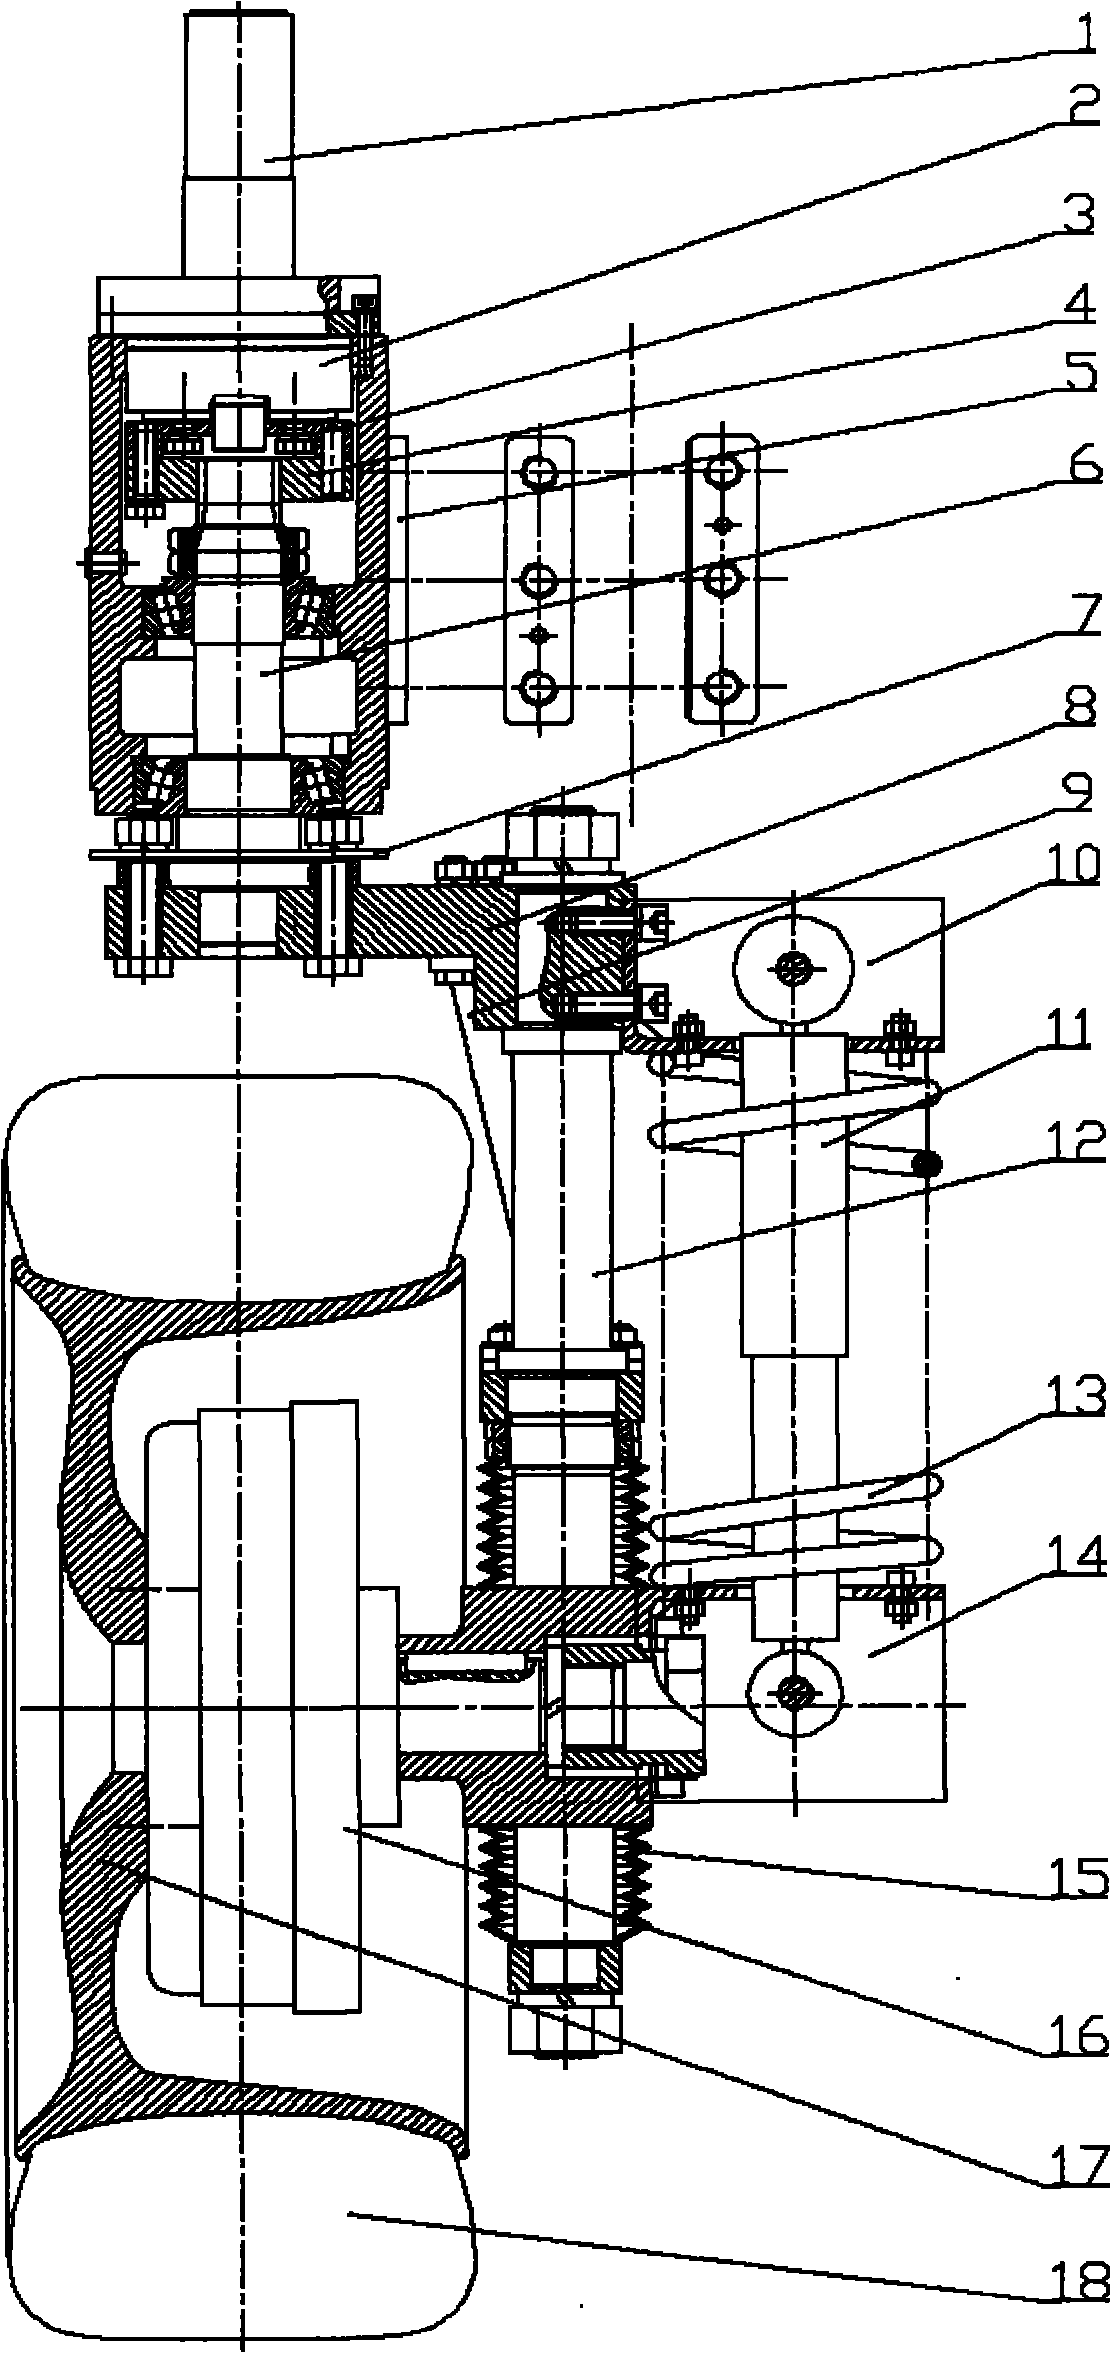 Main pin zero bias wire-controlled independent driven and steering automobile running mechanism and electric vehicle